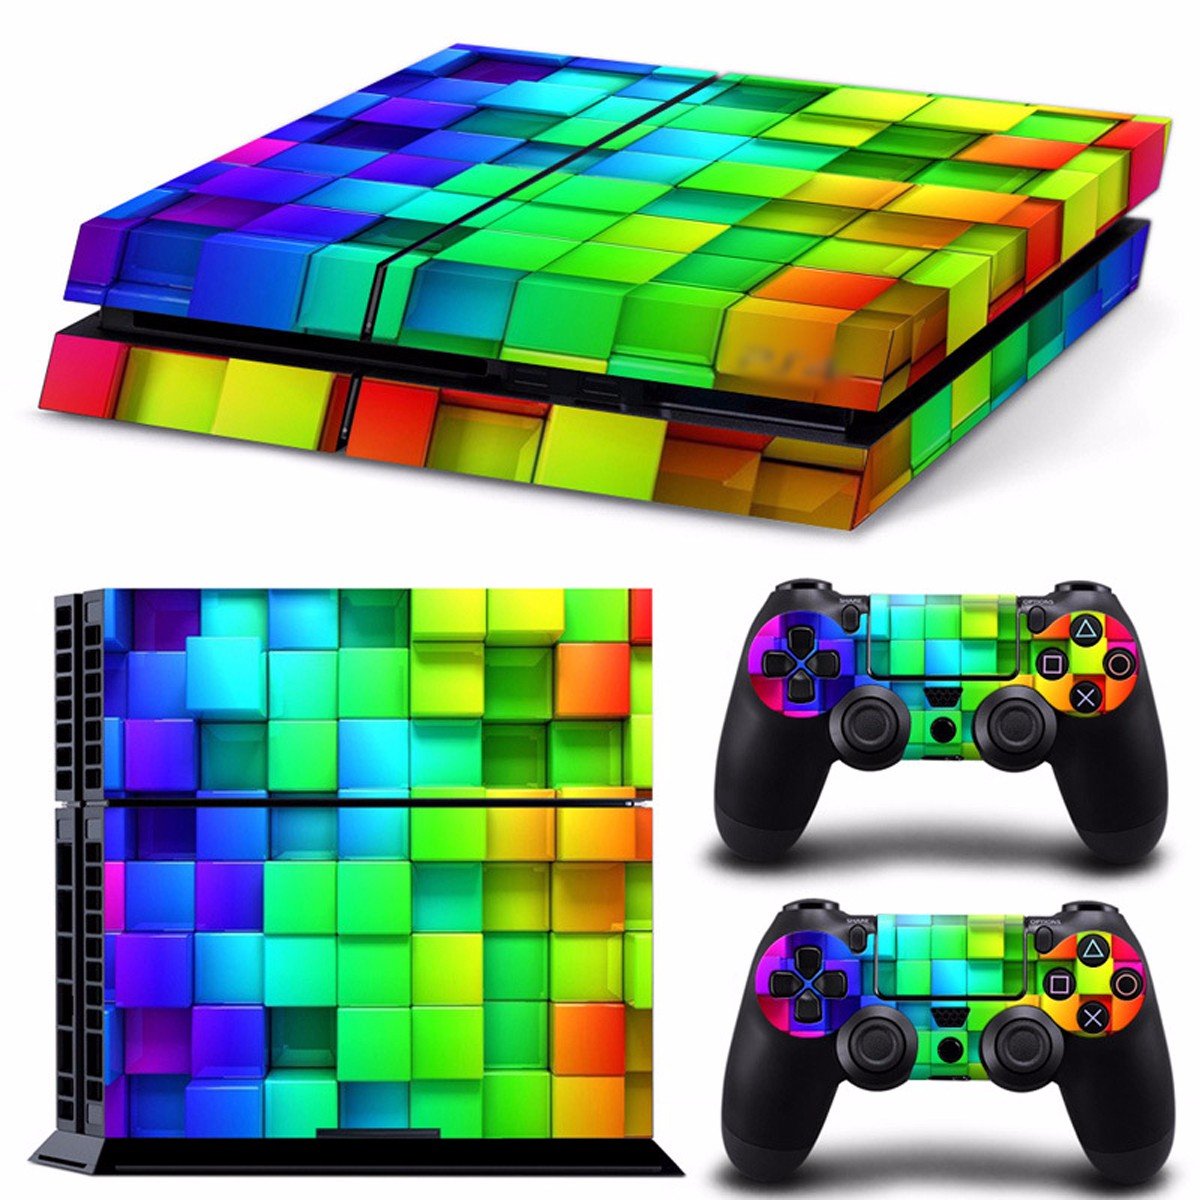 Lattice Style Vinyl Skin Decal For PS4 Play Station 4 Console and 2 Controllers 2